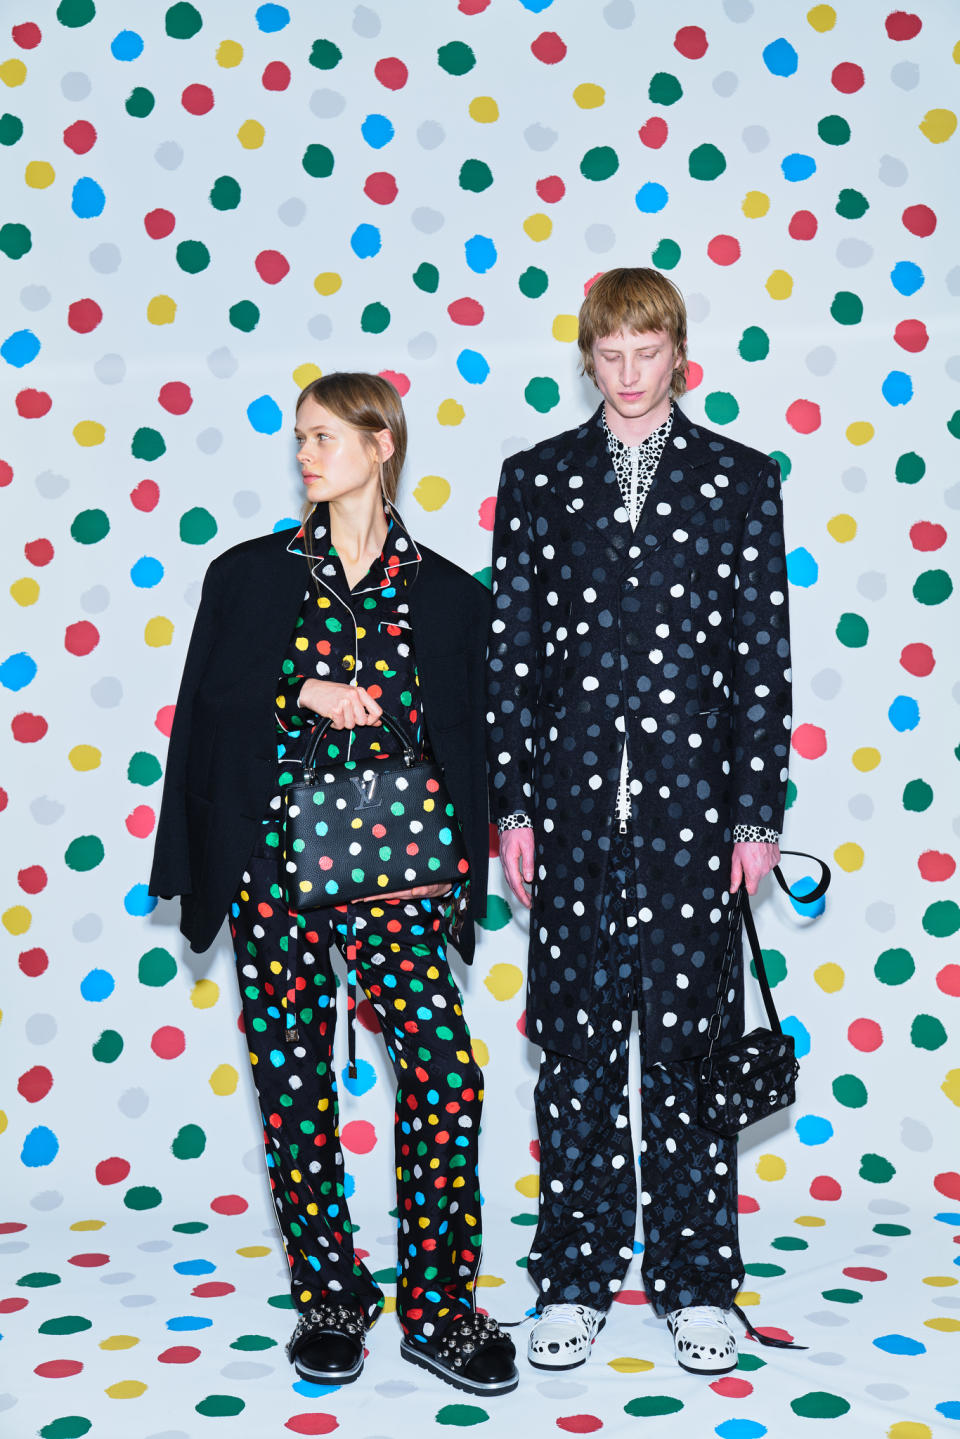 A look from the Louis Vuitton x Yayoi Kusama Collection